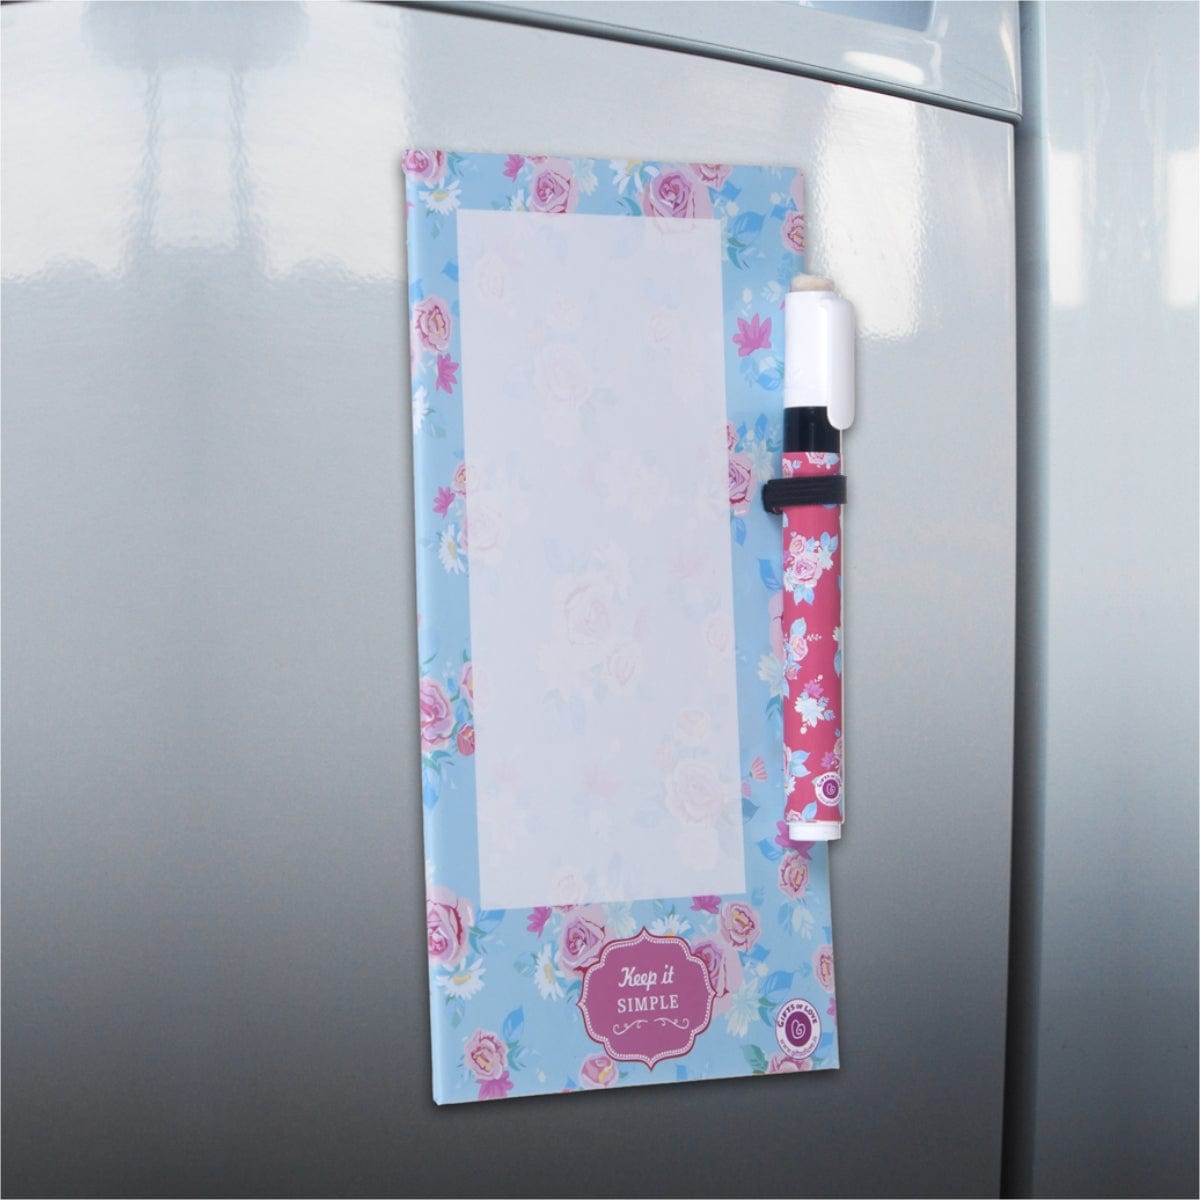 Gifts of Love Rewritable Dry Erase Board Esther Rose